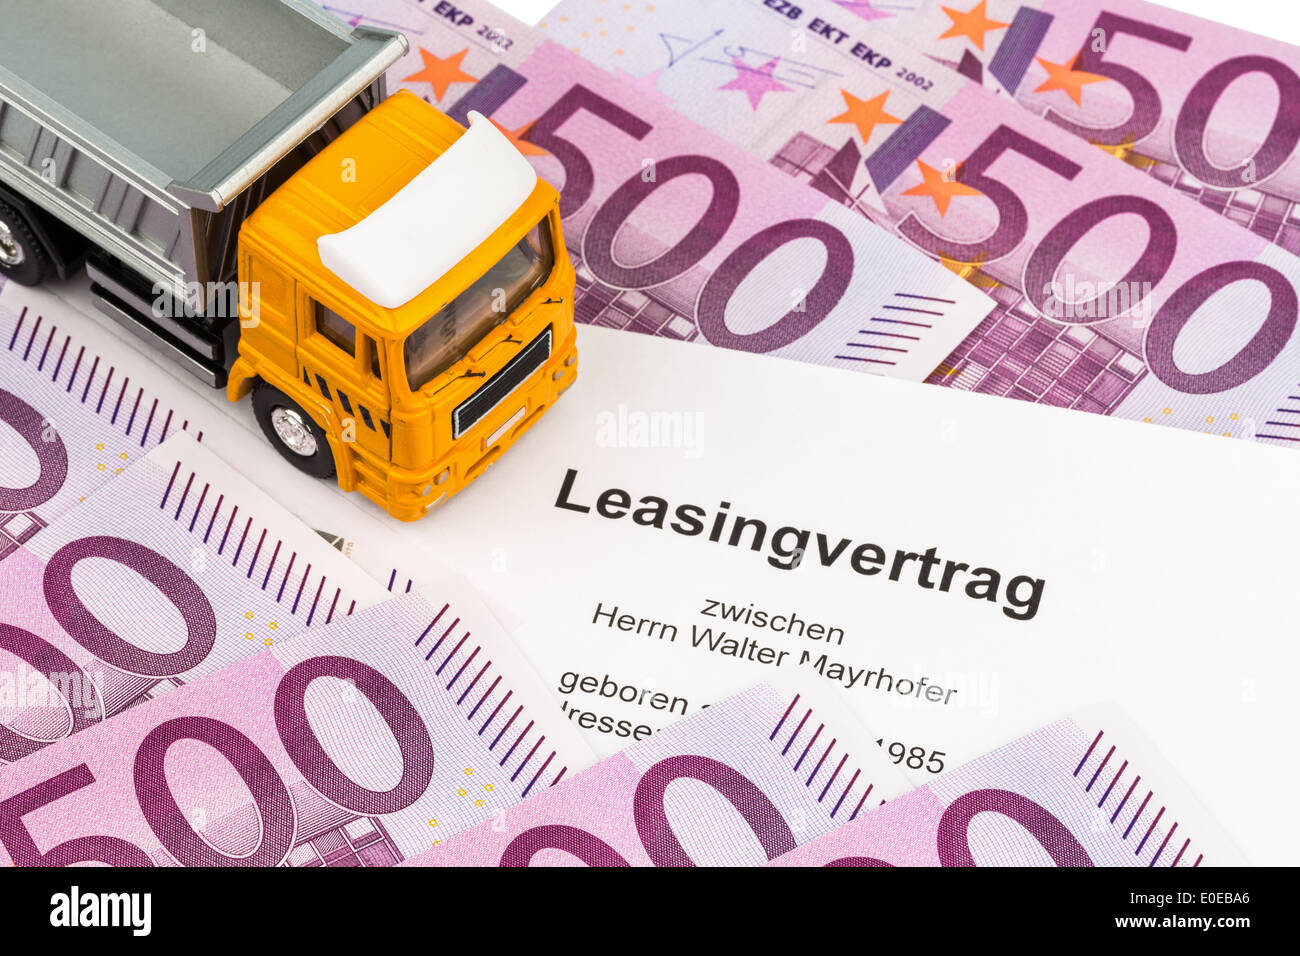 A leasing contract for new truck. Invest in new vehicles brings cost advantages., Ein Leasingvertrag fuer neuen Lastwagen. Inves Stock Photo